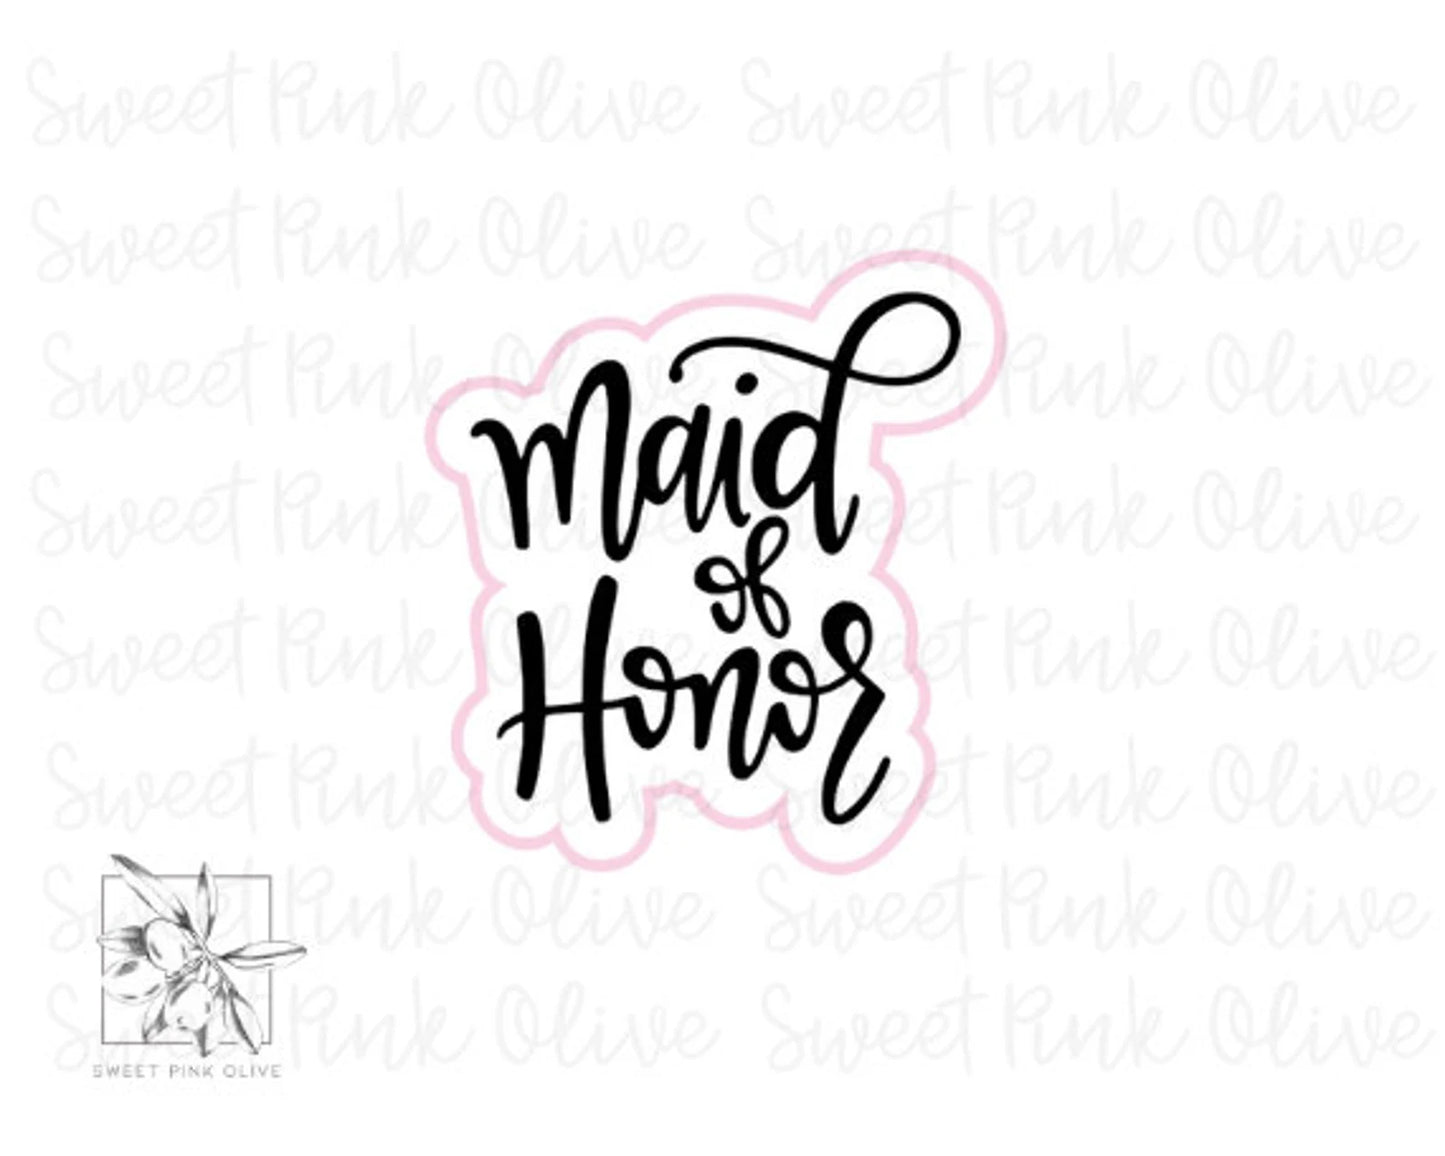 Maid of Honor Hand Lettered Cookie Cutter and/or Stencil